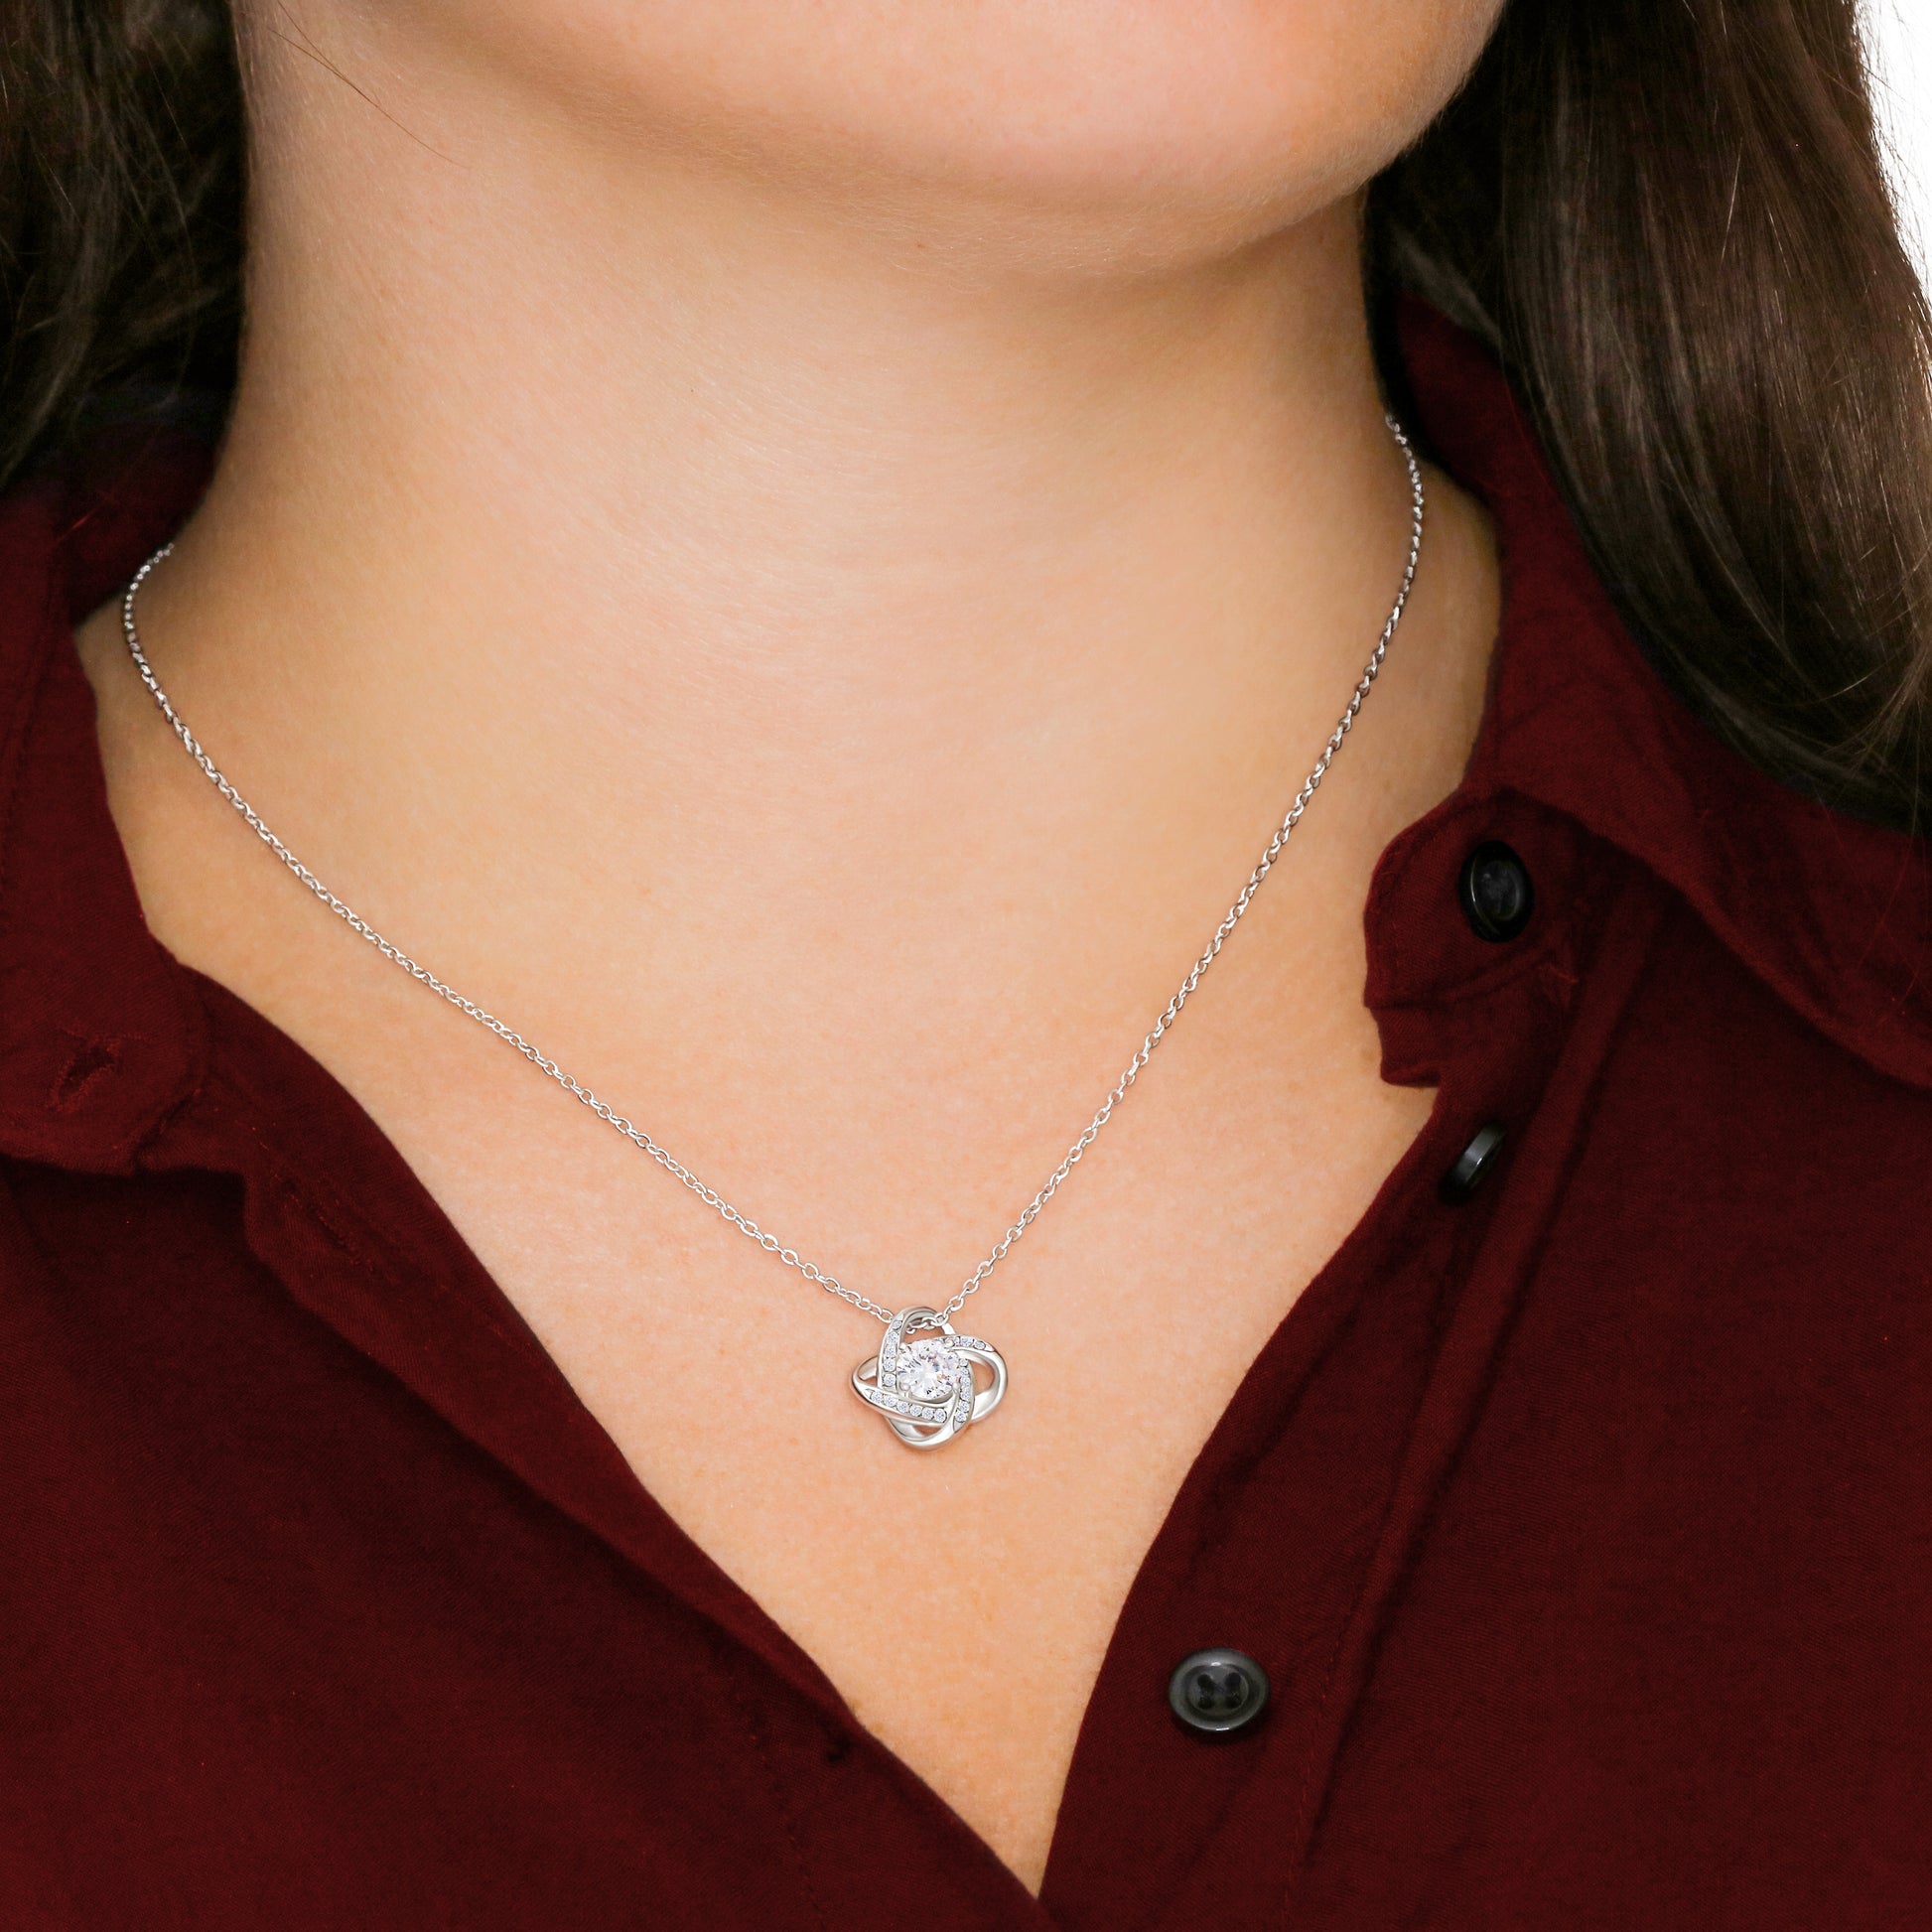 For a Great Mom Gift, Love Knot Necklace, From All of Us For Mother's Day